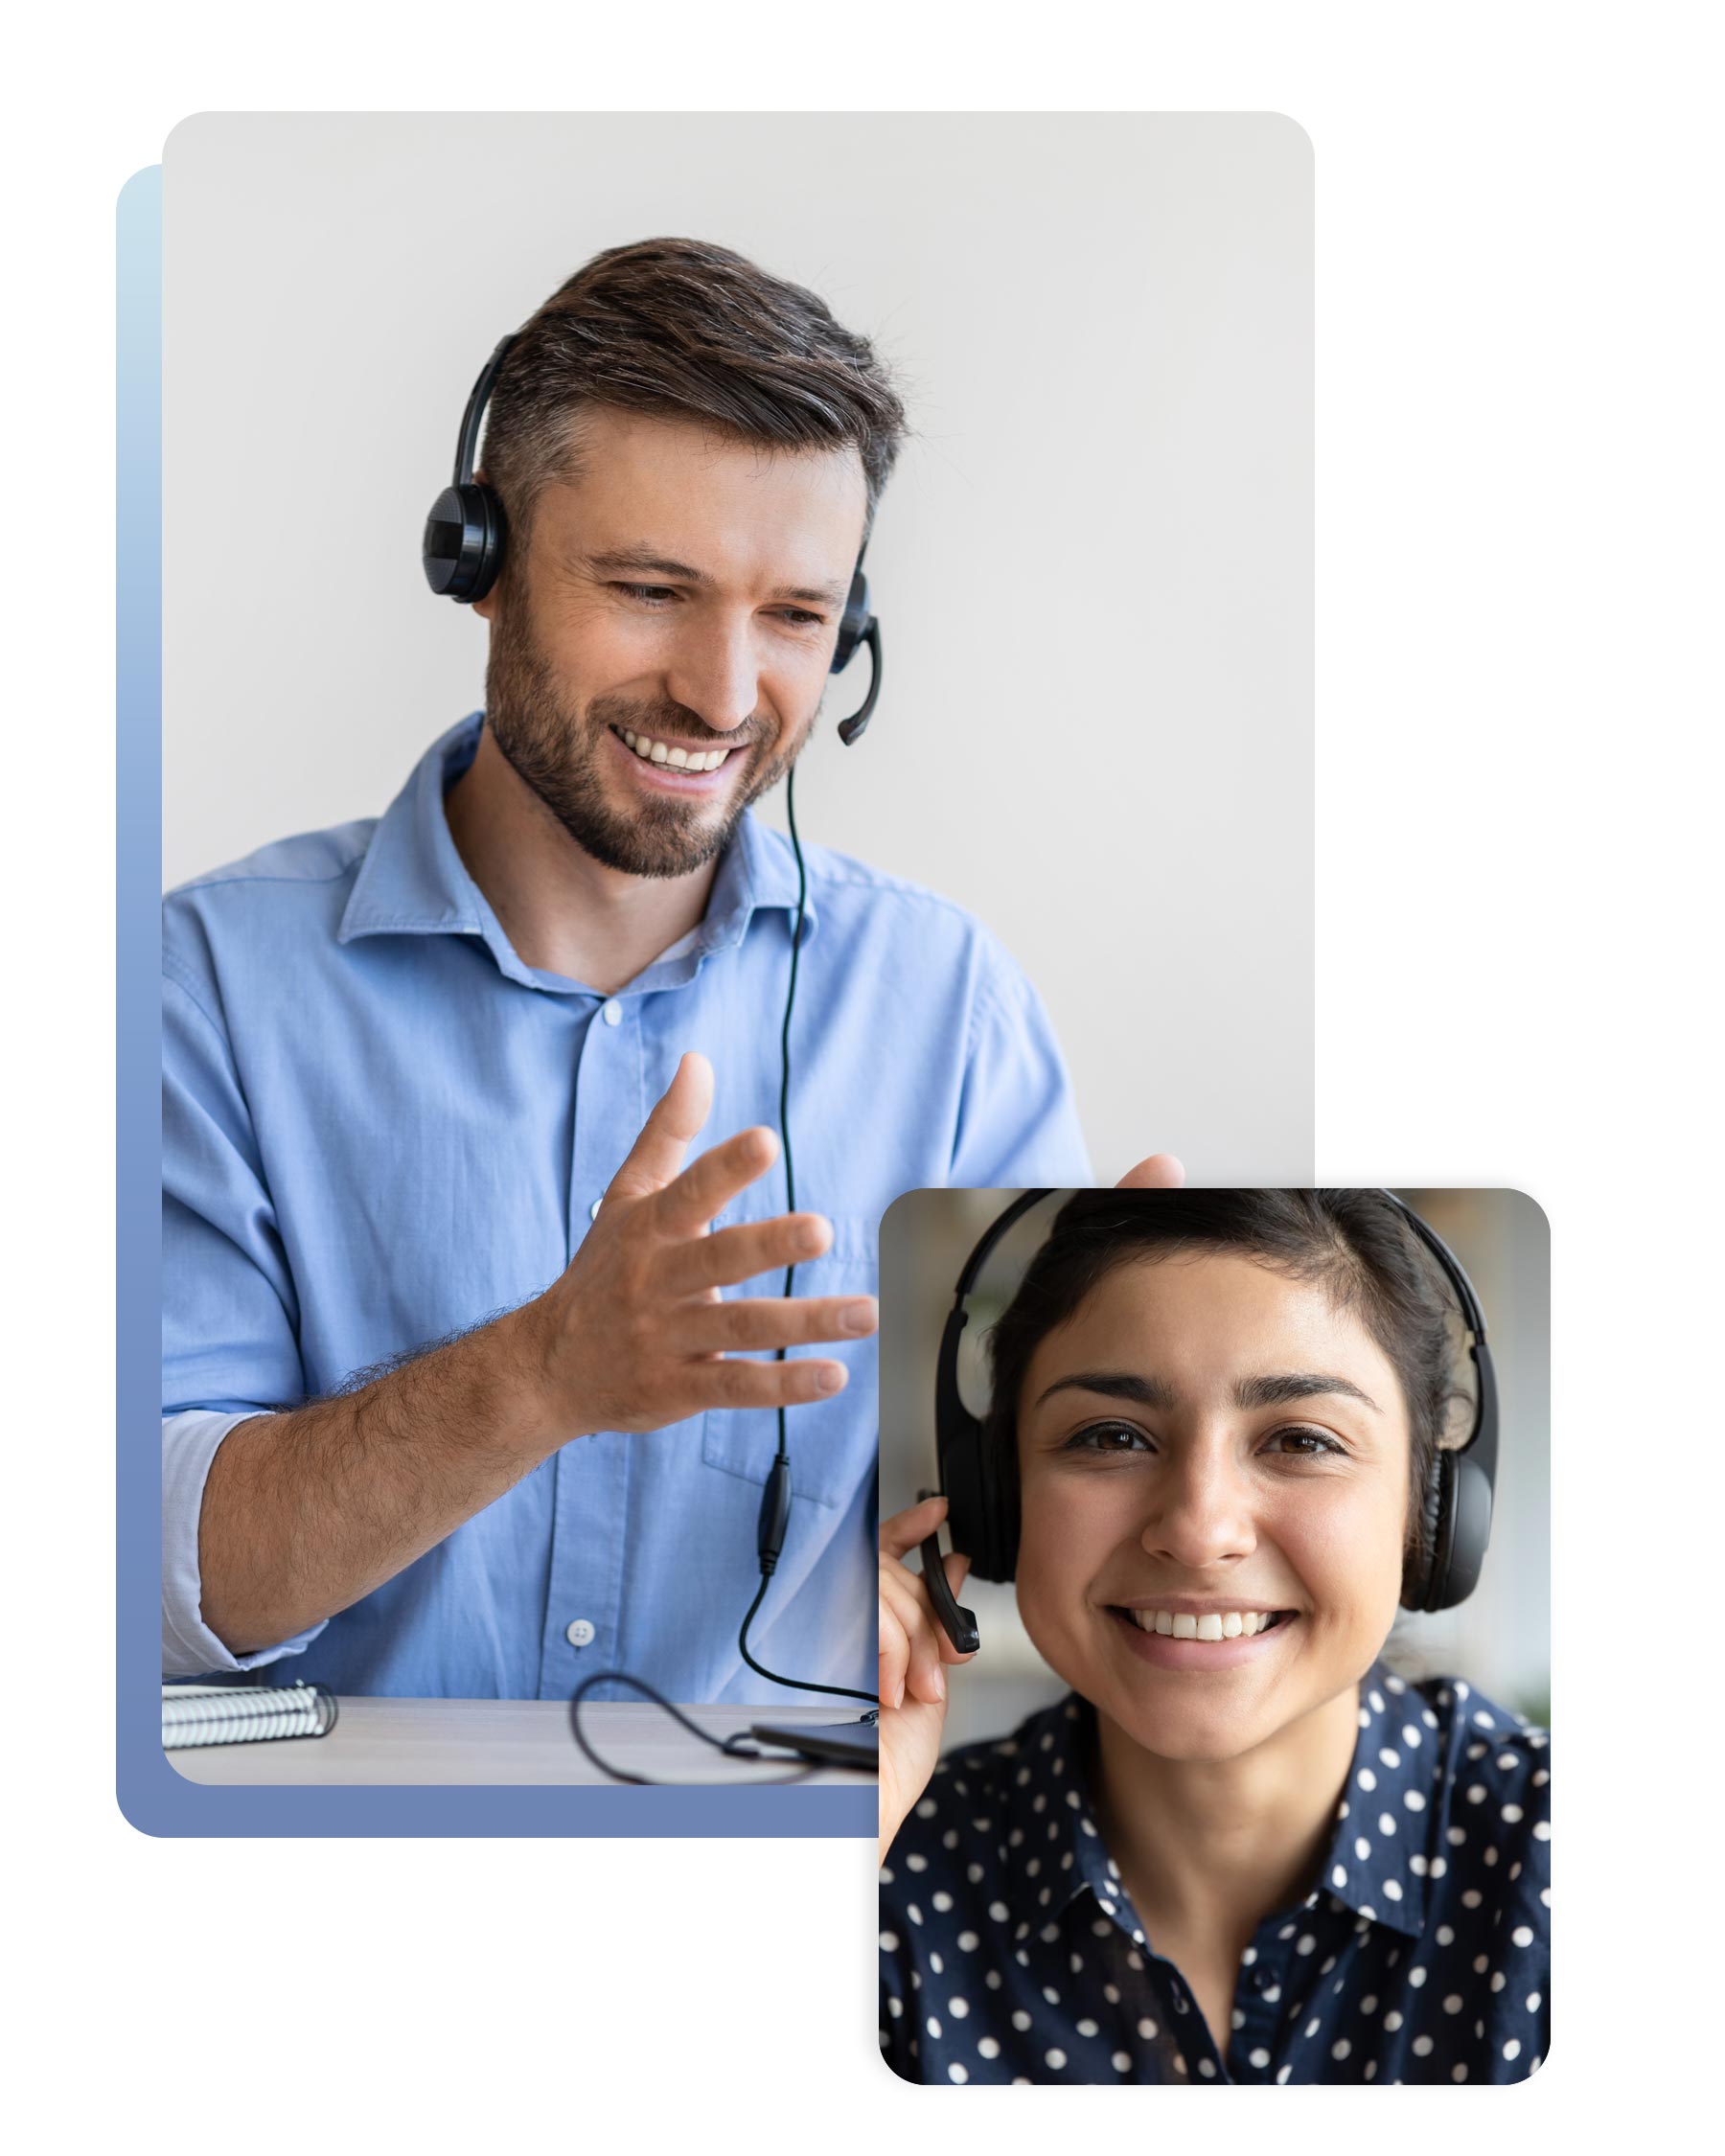 Male and female colleagues talking on headsets